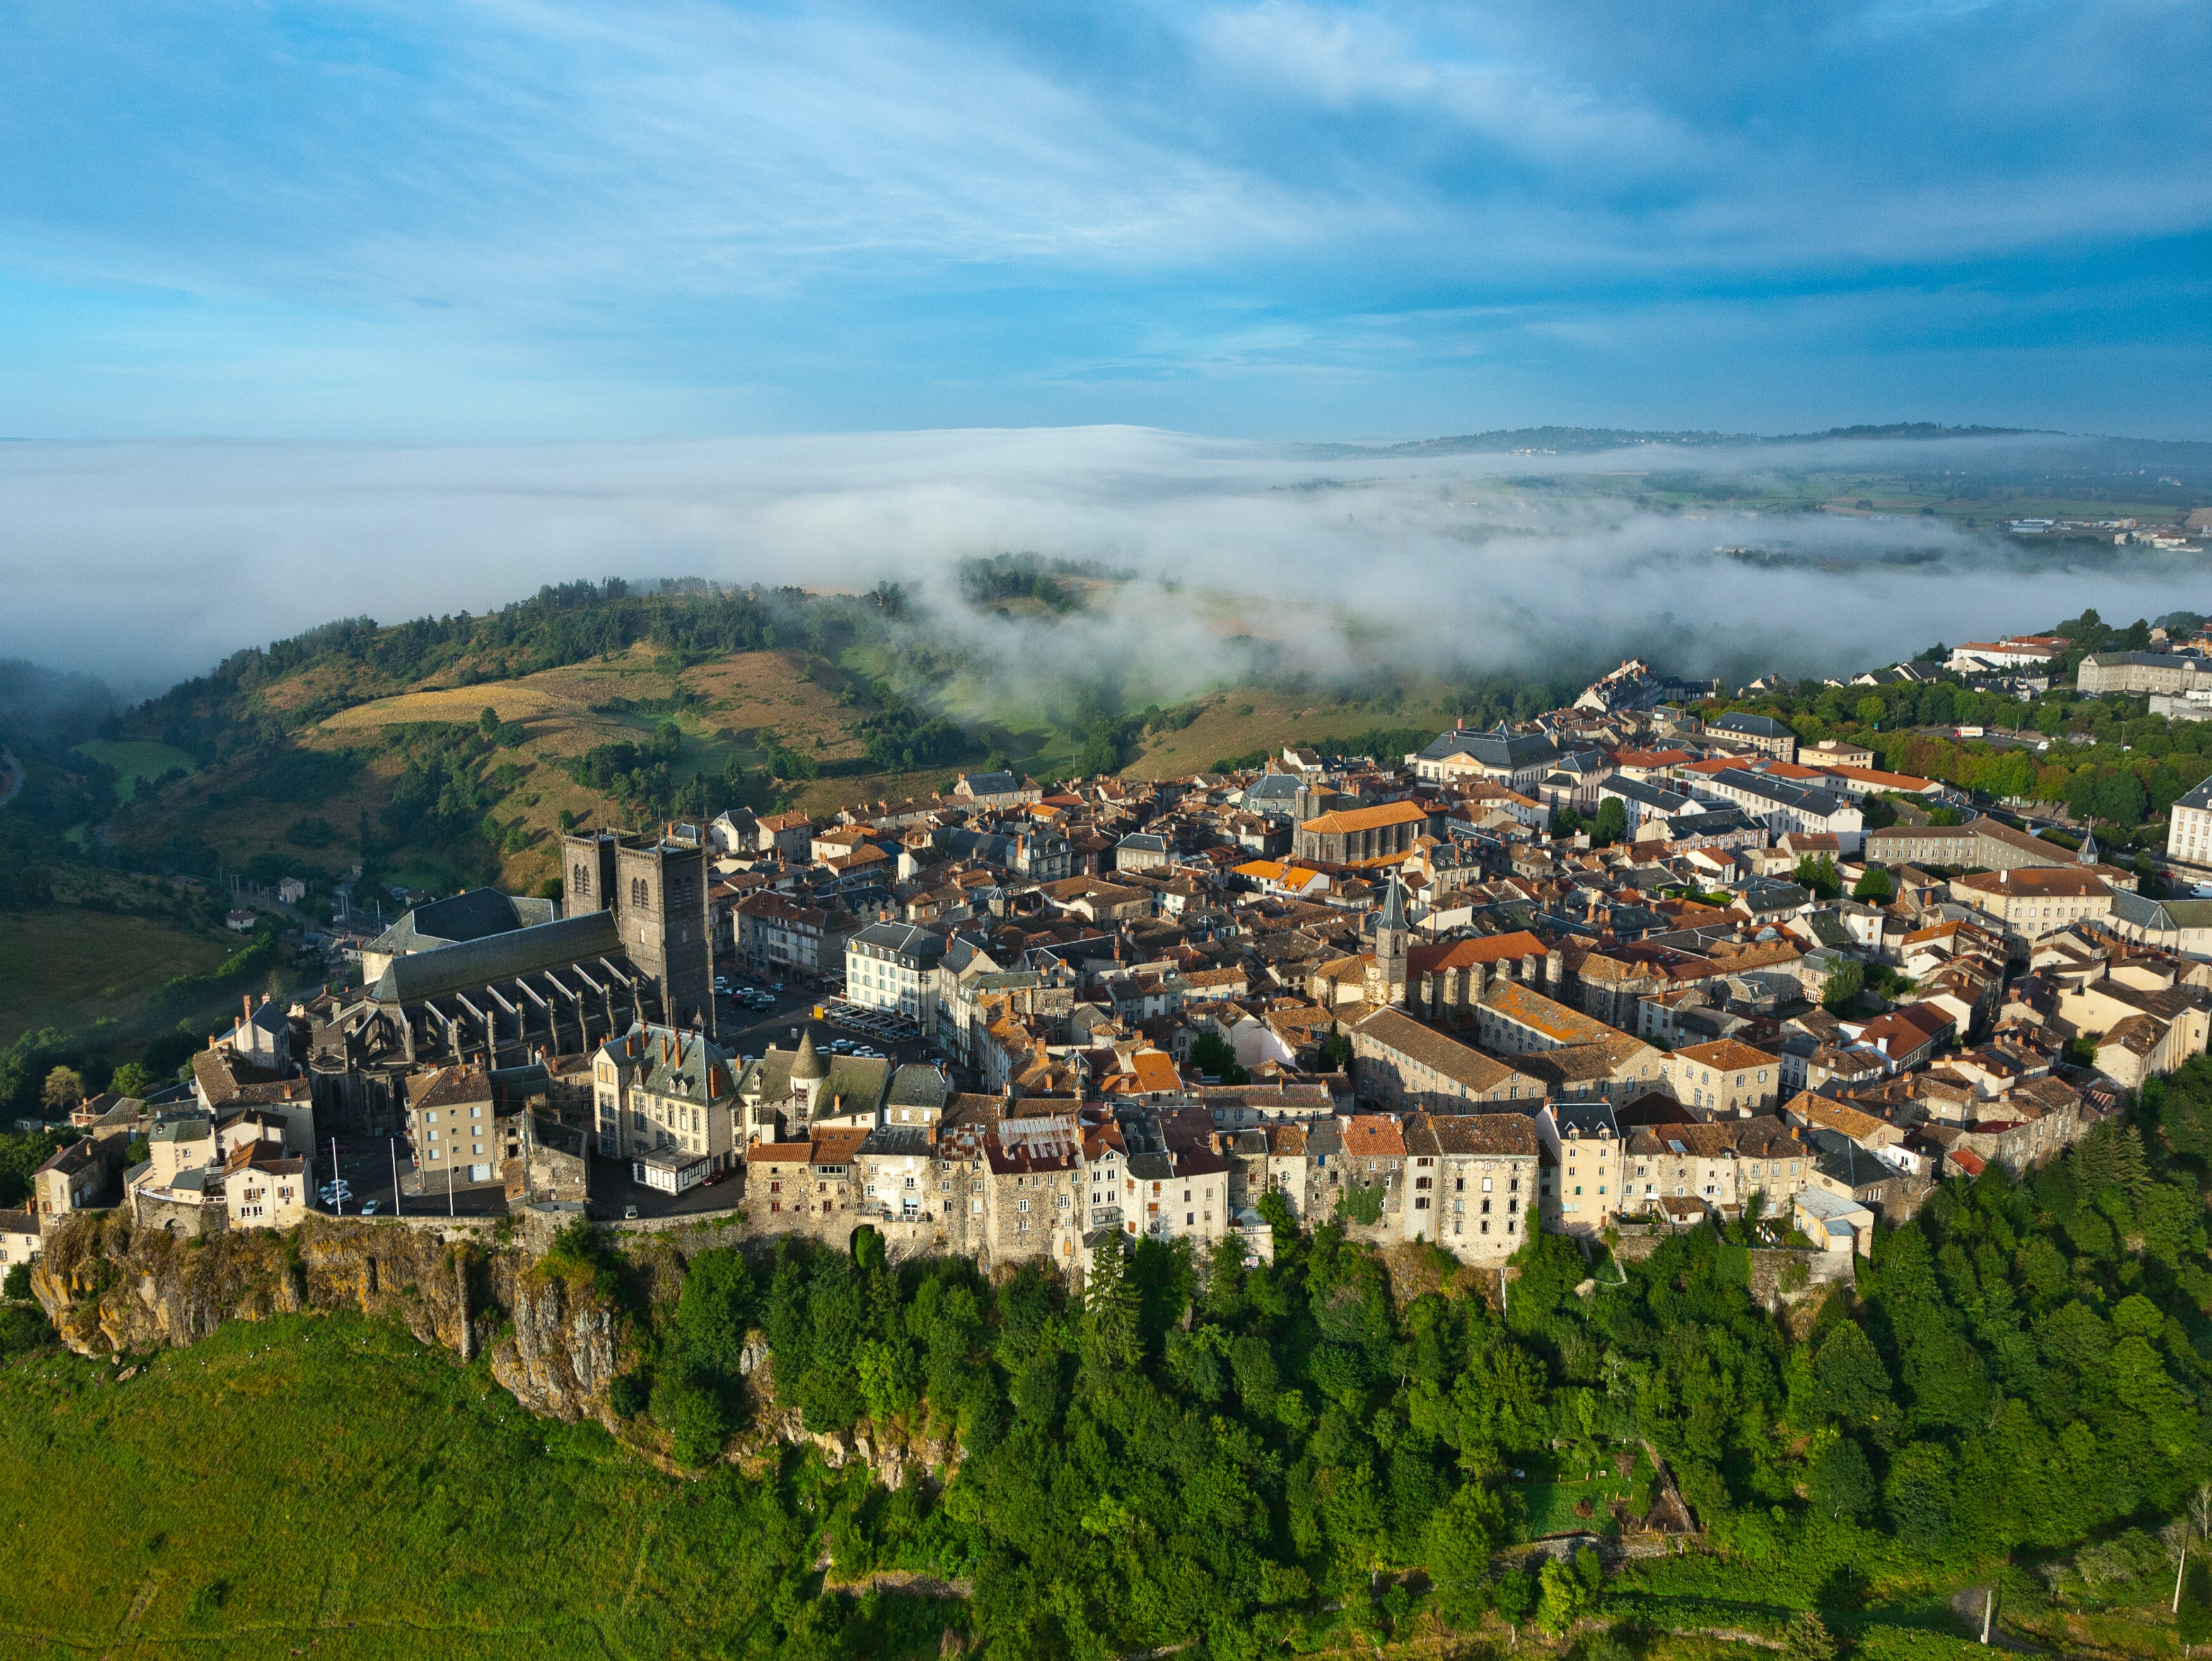 Cantal has a proliferation of age-old chateaux, but far fewer tourists than the Dordogne